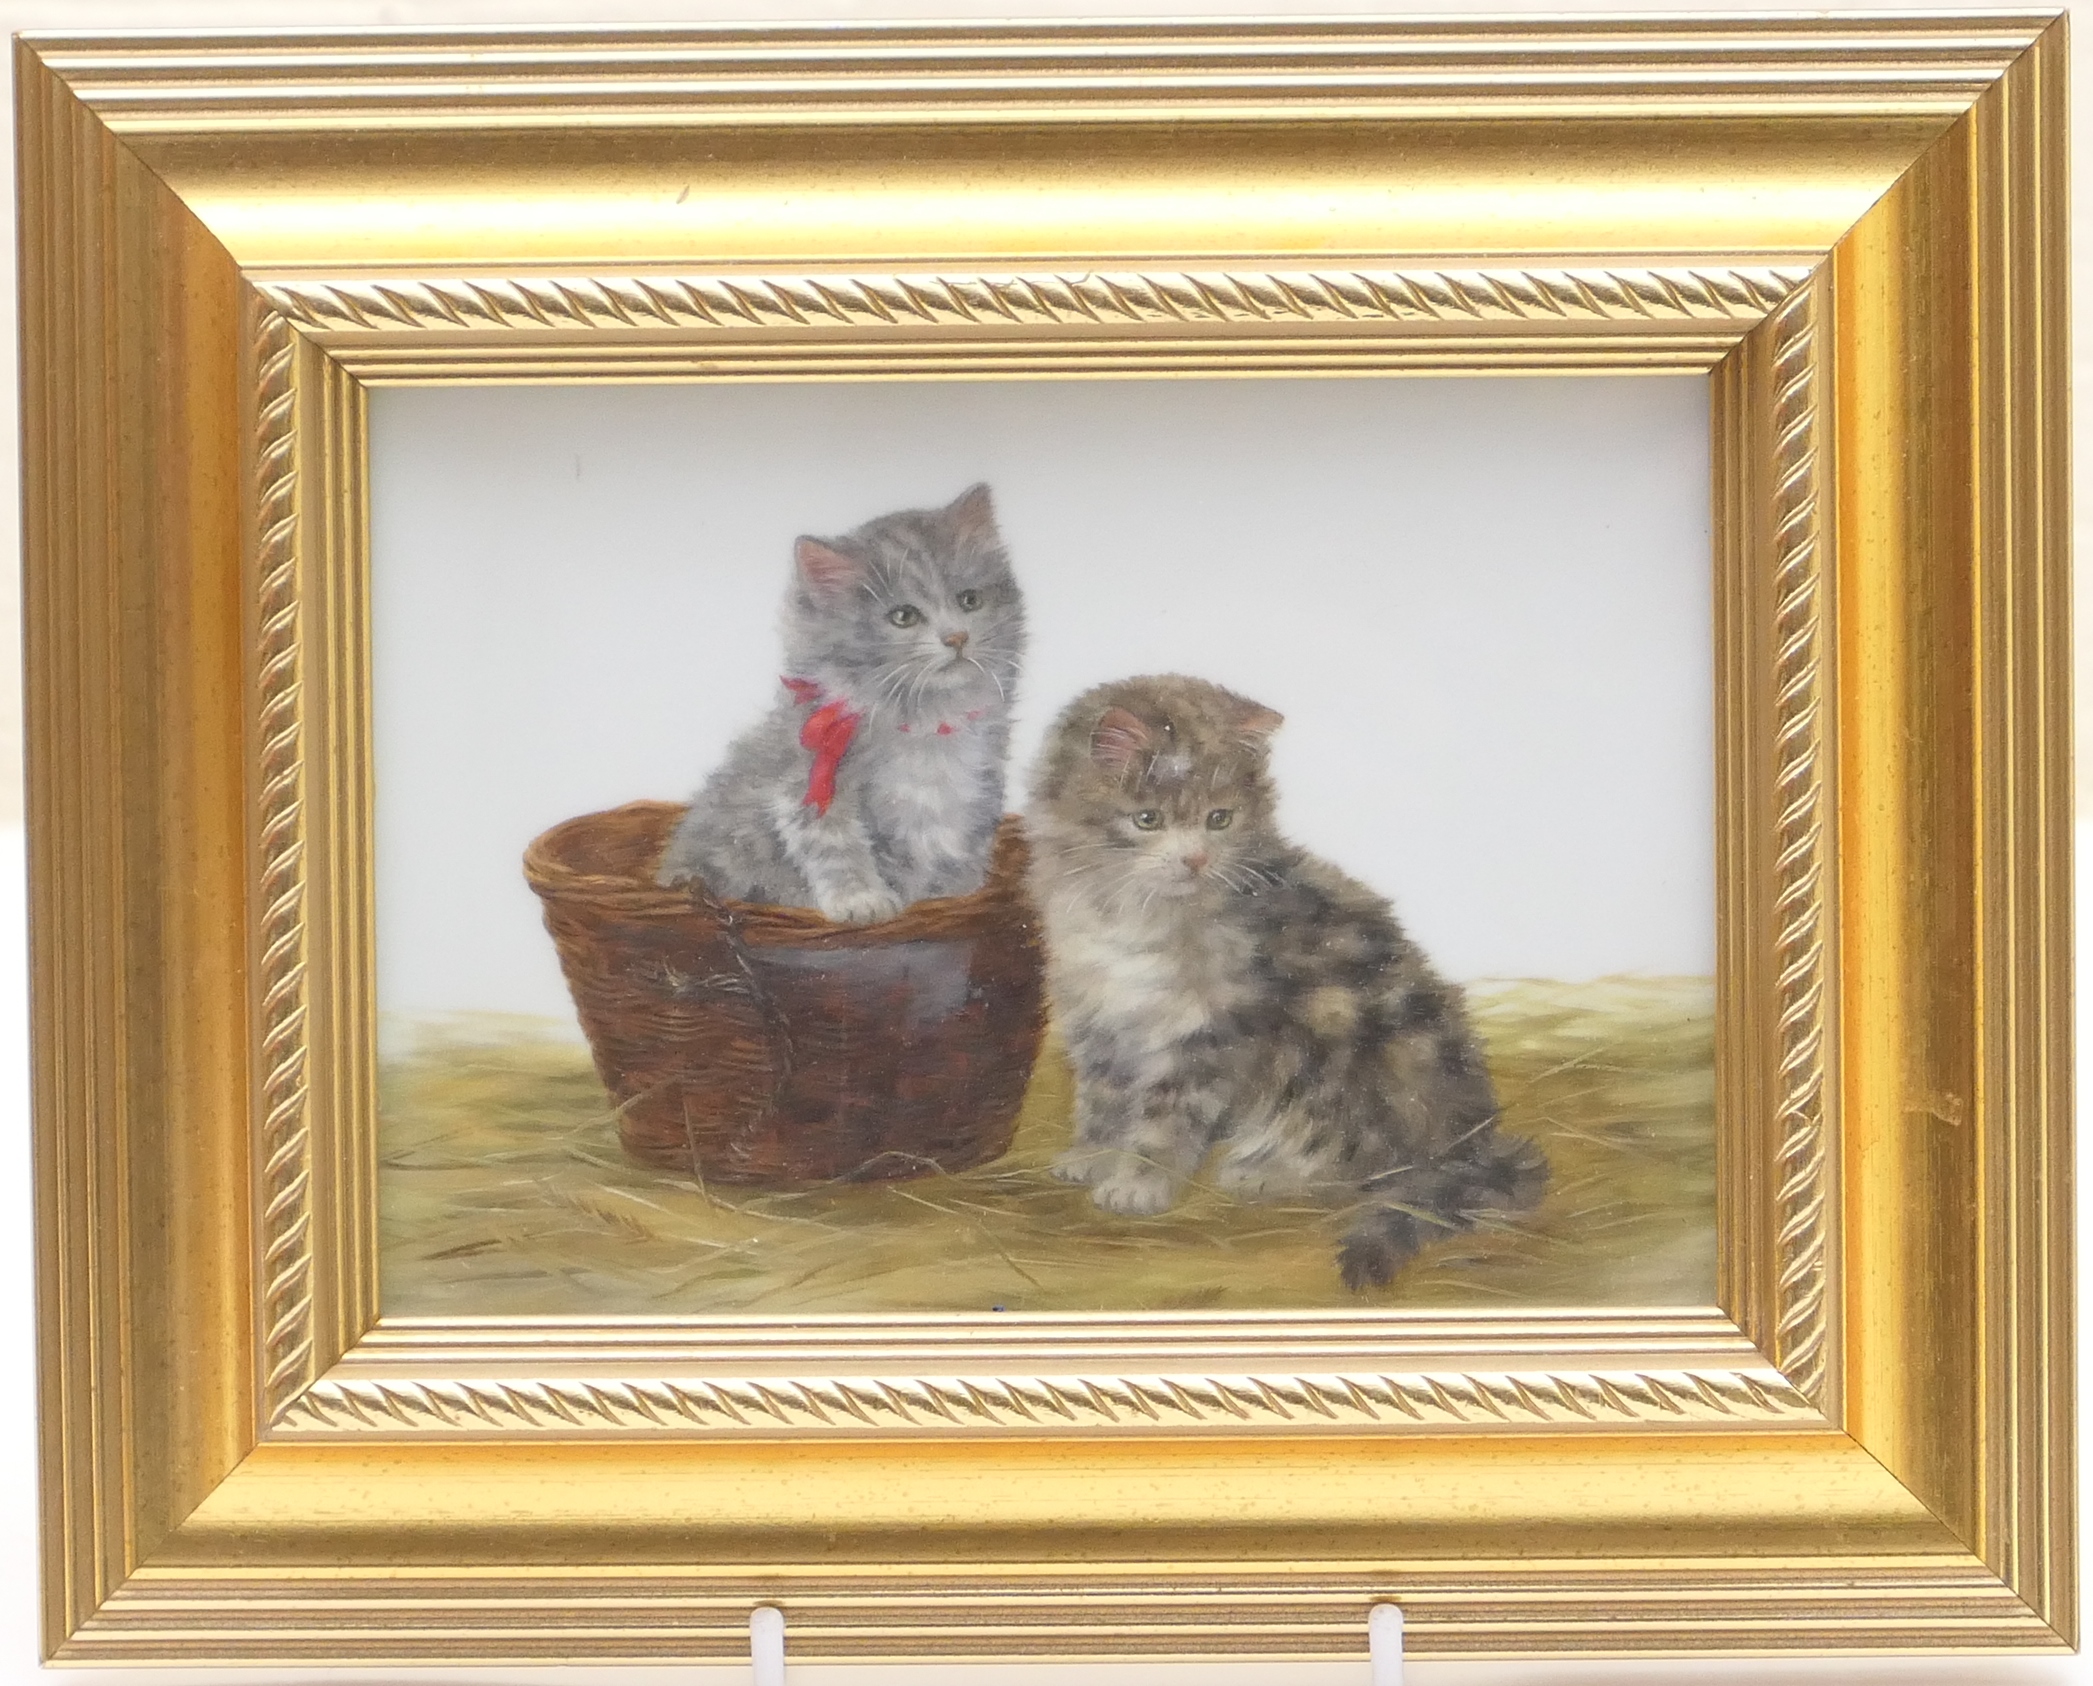 Bessie Bamber (1870-1910), Pair, 'Kittens with a parasol', and 'Kittens in a basket' oils on